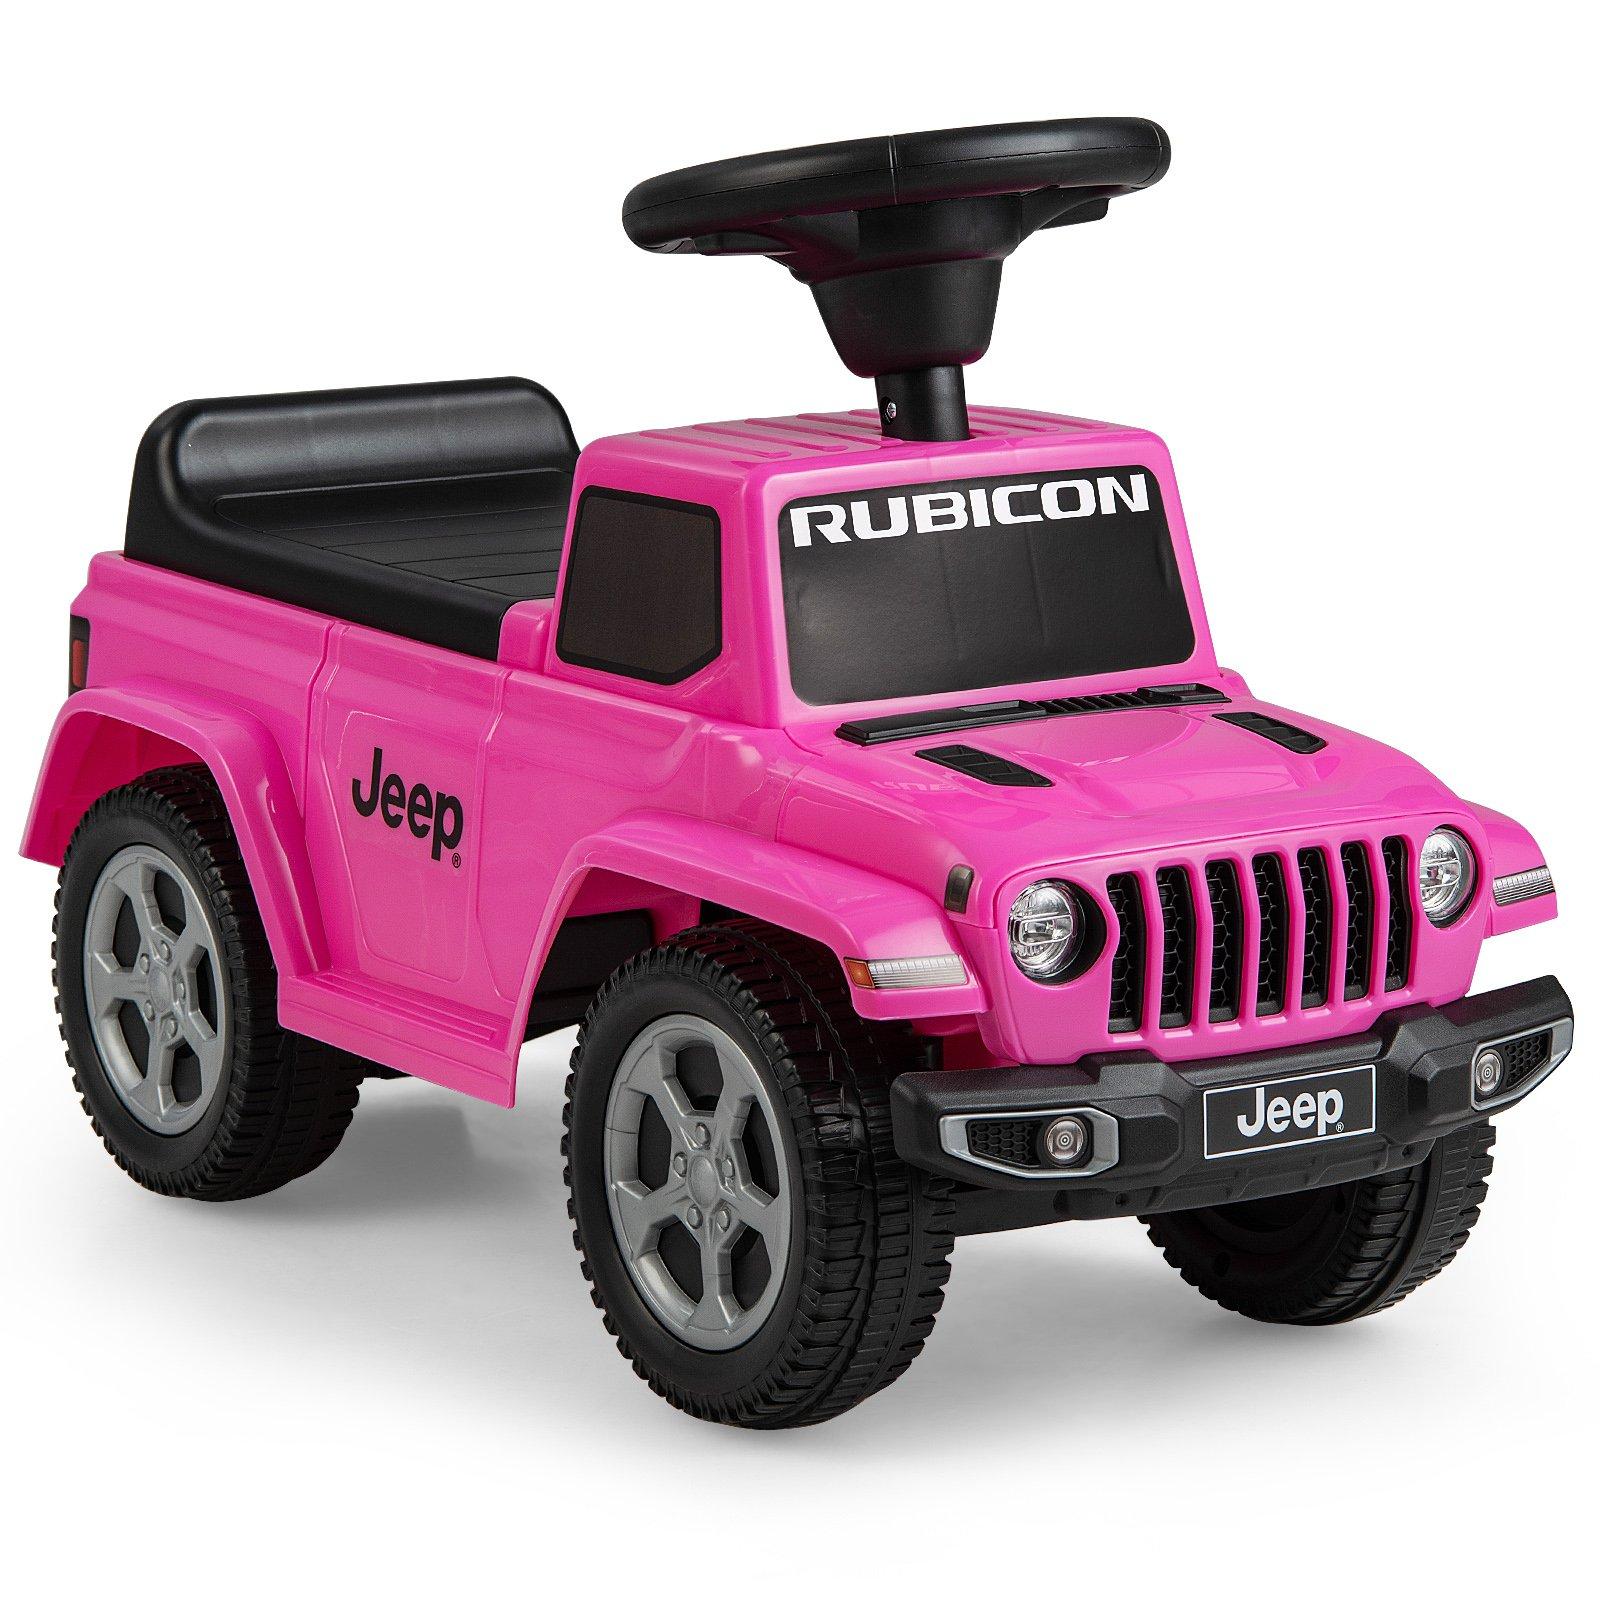 Children's Ride on Push Car Licensed Jeep Toddler